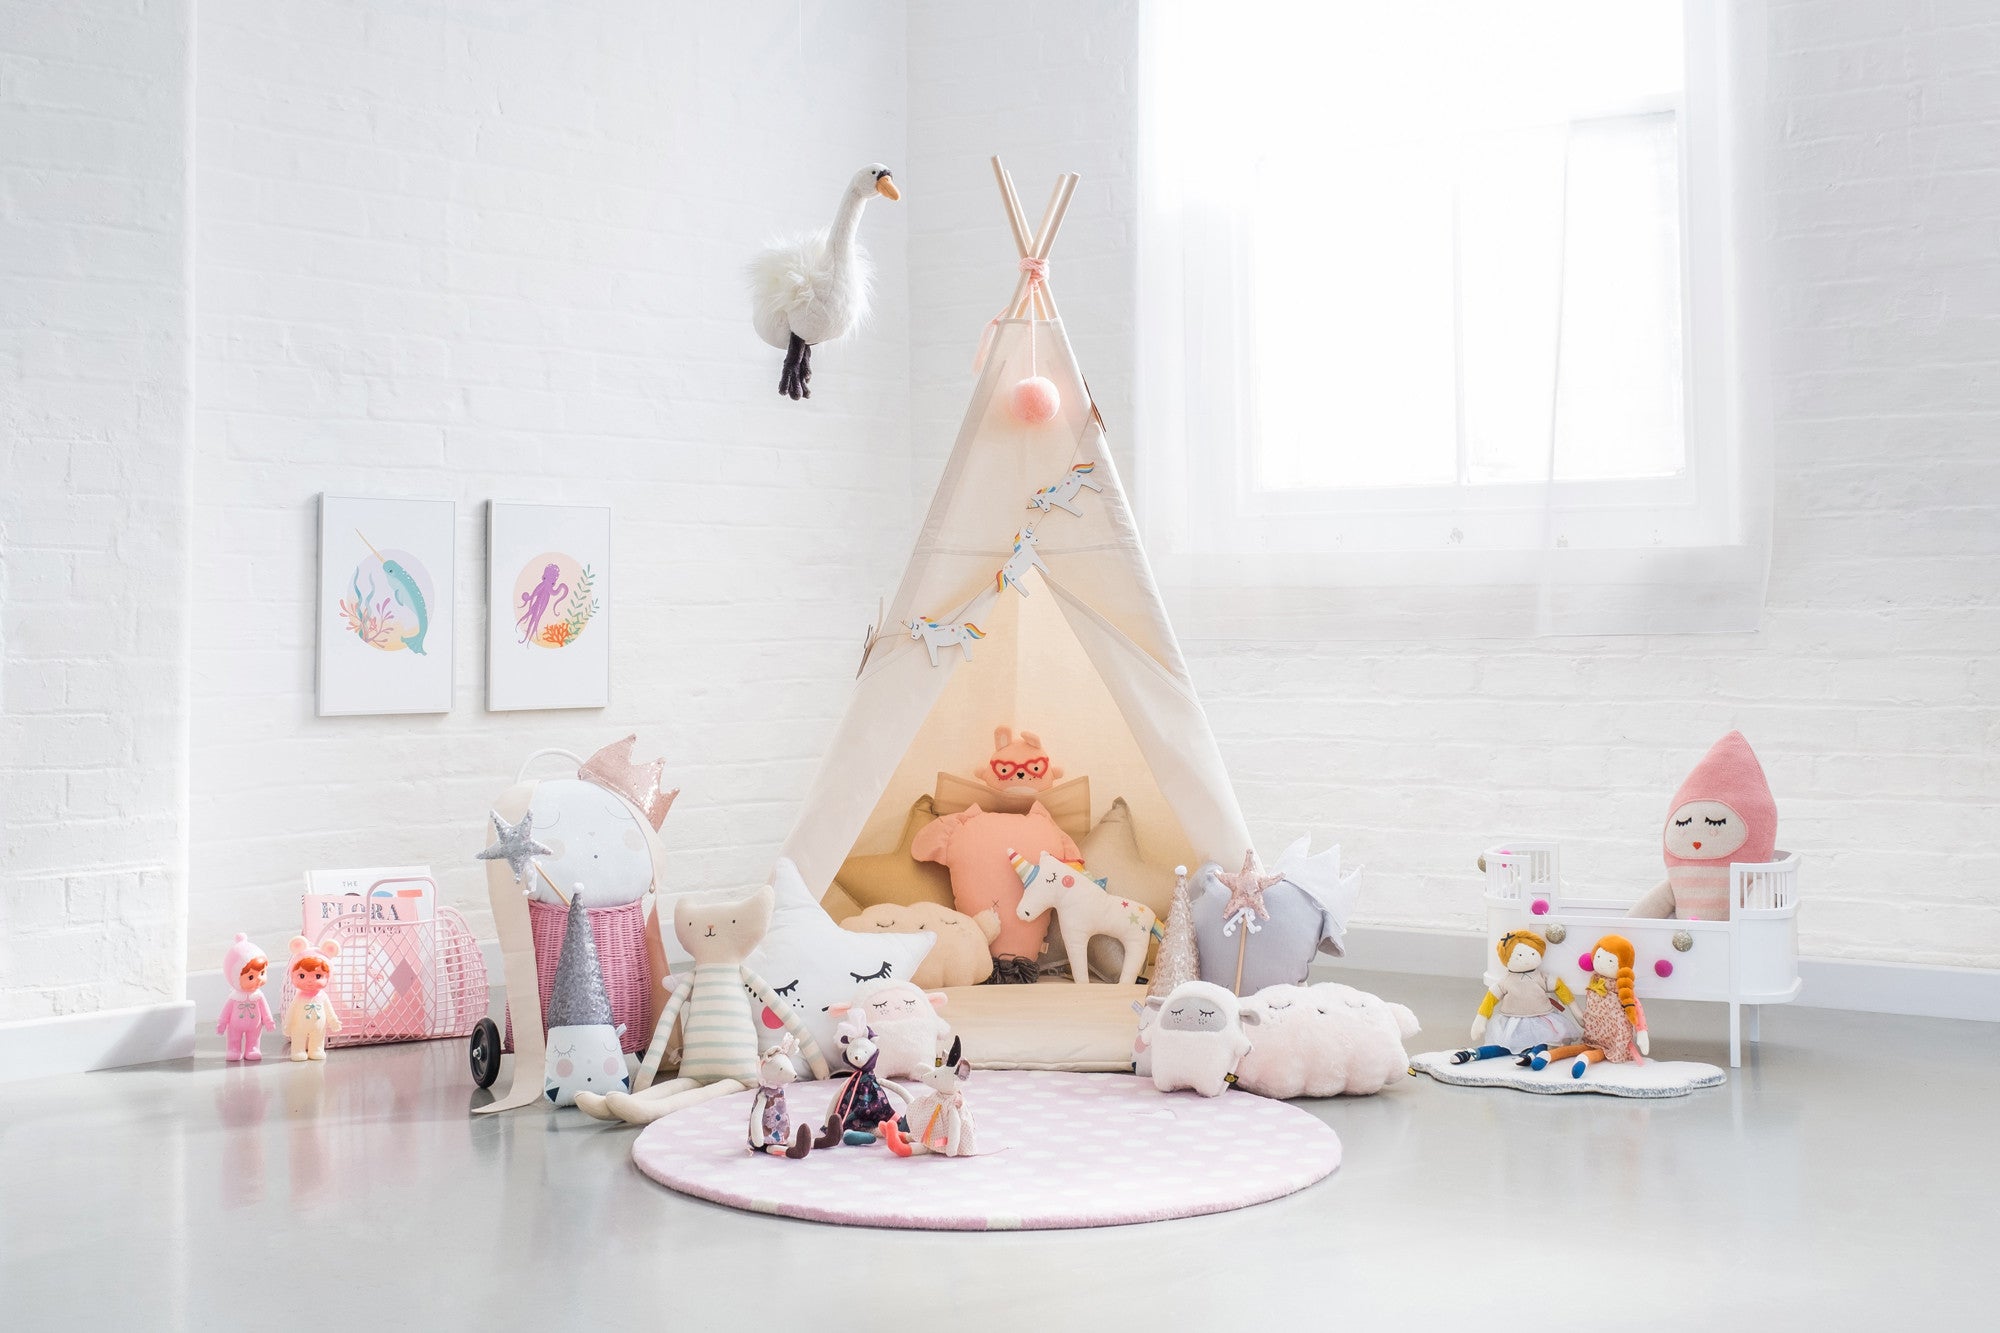 A Magic Tent Children's Play Room, styled by Bobby Rabbit.